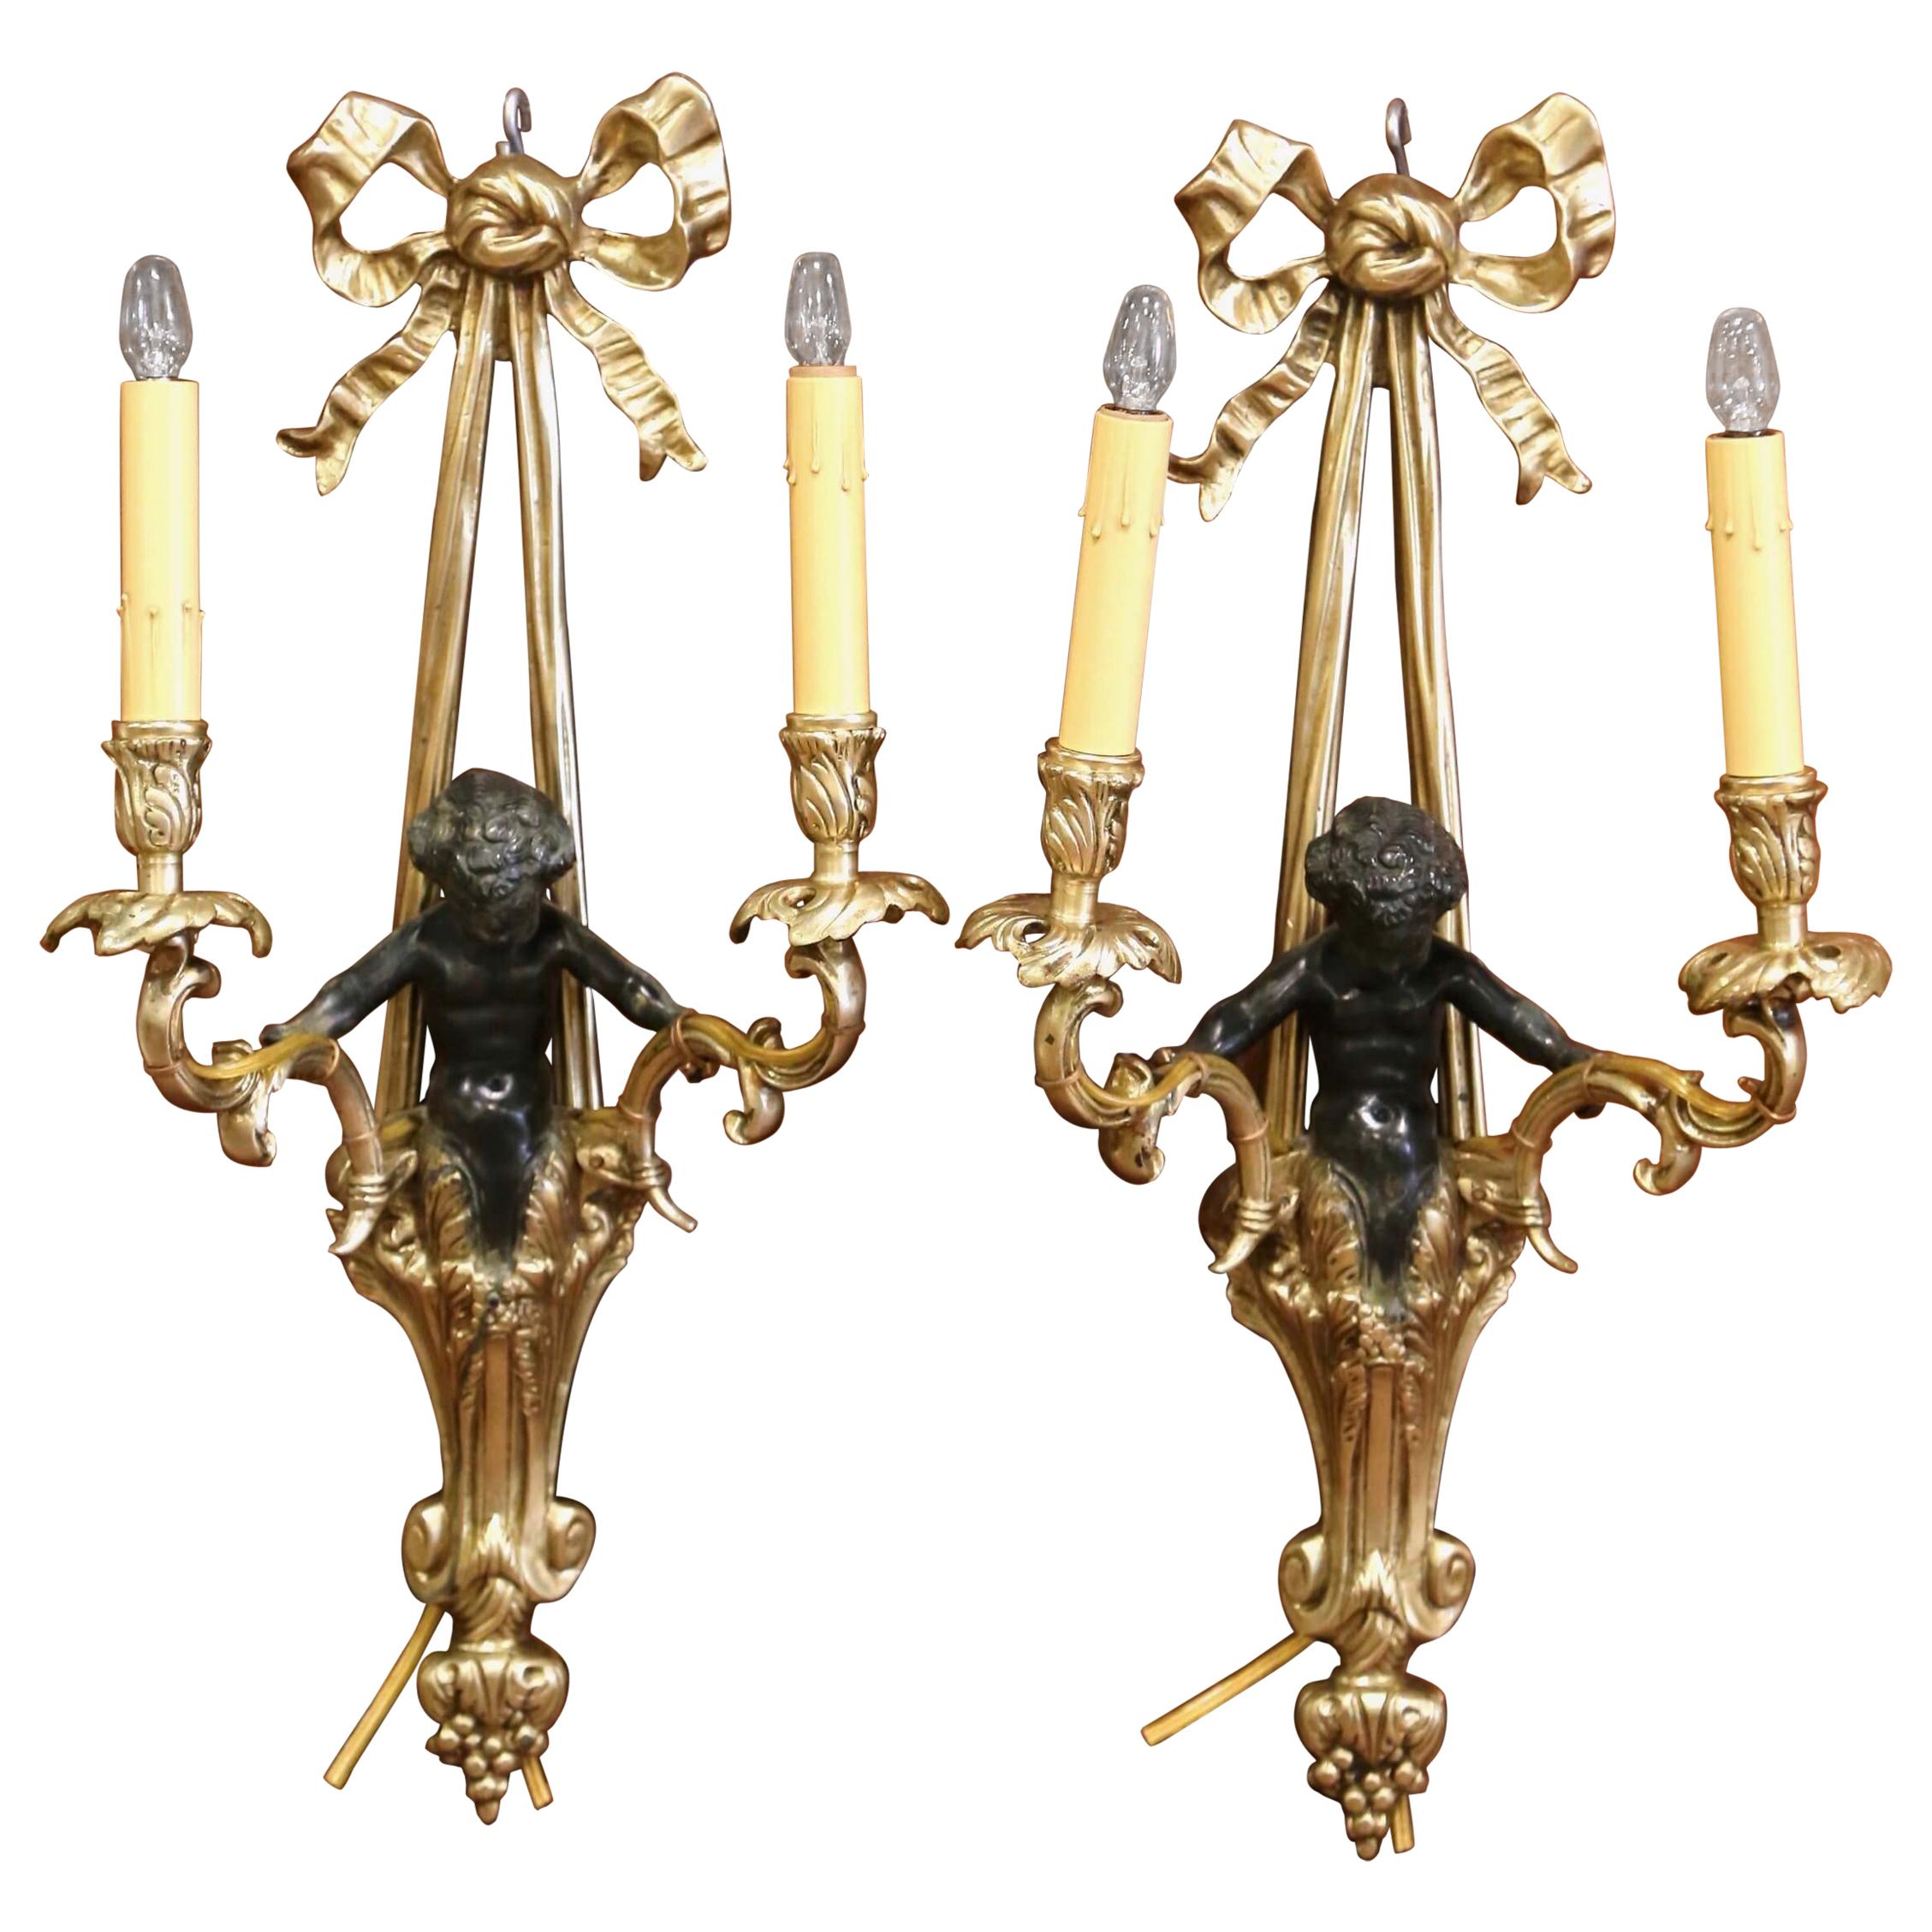 Pair of Mid-19th Century French Louis XVI Bronze Dore Wall Sconces with Cherubs